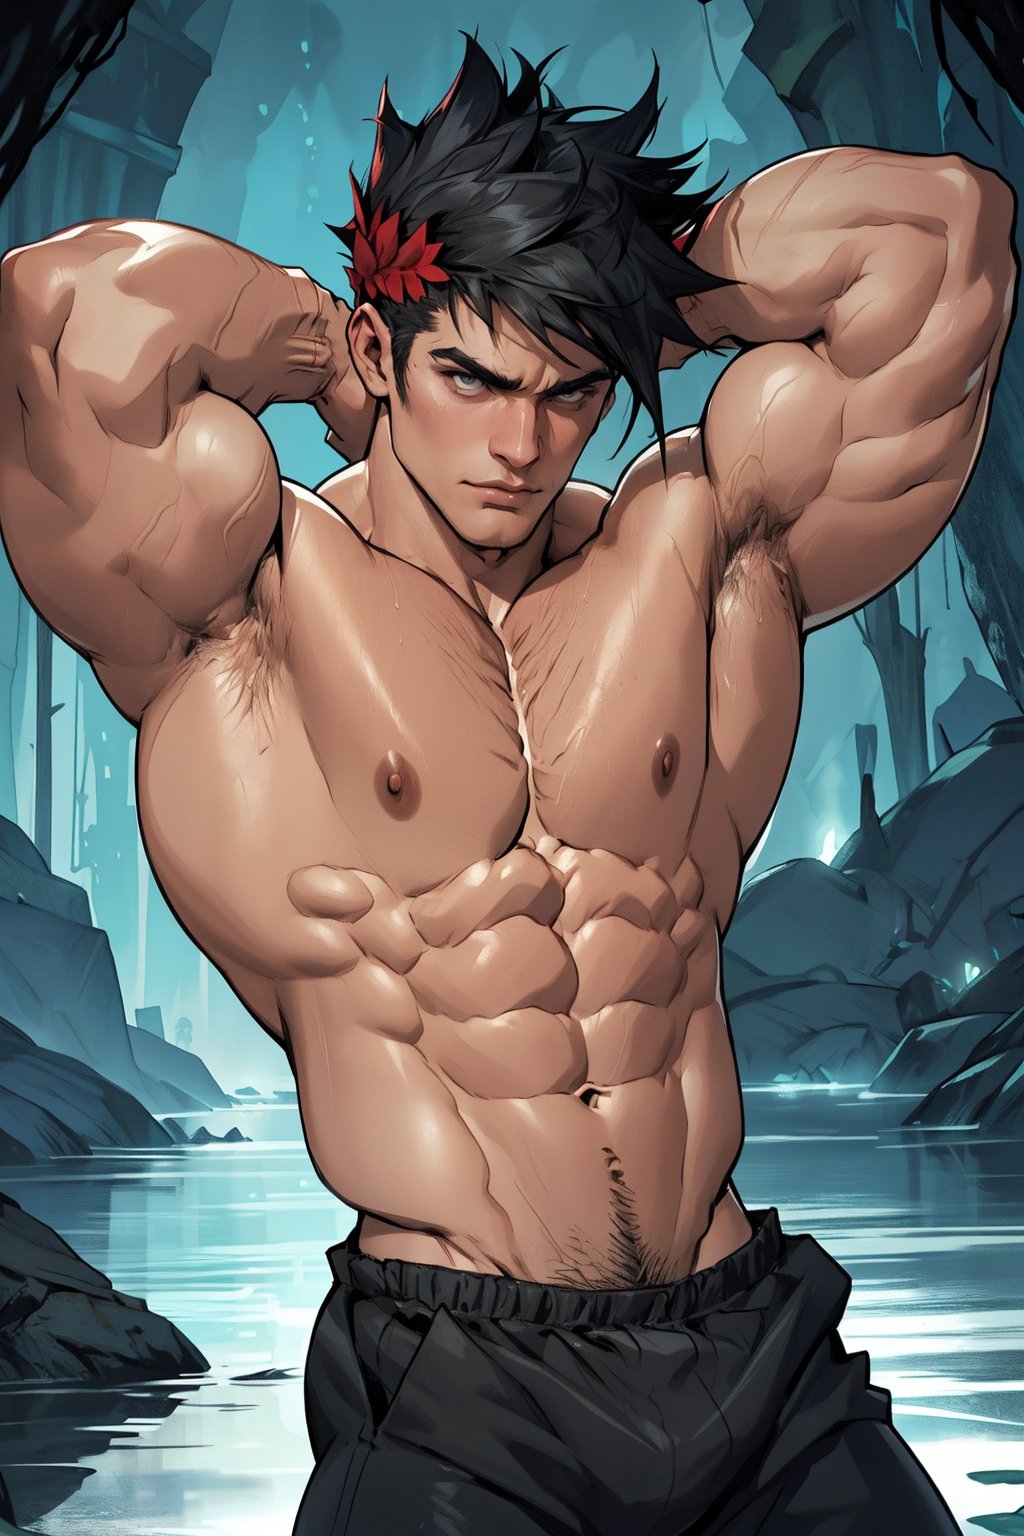 Close-up shot of Zagreus' imposing physique: rippling muscles bulge beneath his dark, scaly skin as he flexes his powerful arms, veins stark against the eerie dim lighting. Shadows dance across his chiseled chest and abs, accentuating his Herculean build in a dark, damp cave-like setting.